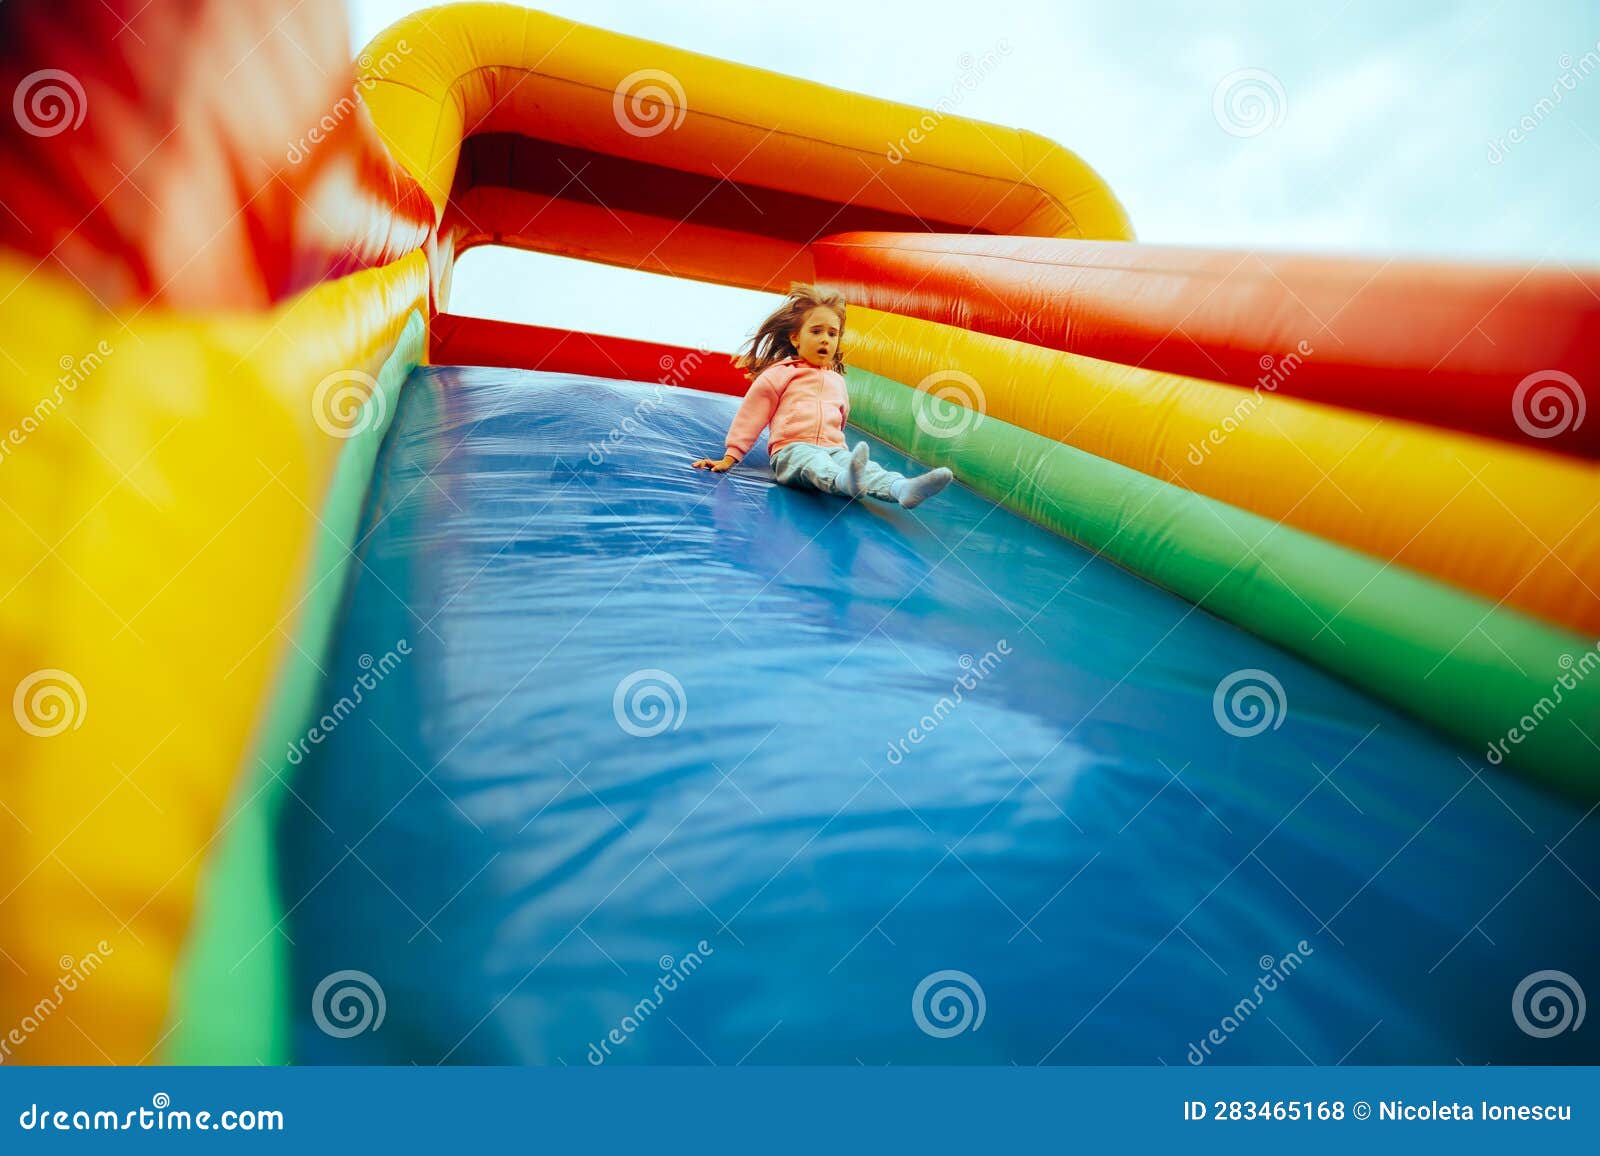 Water Slide stock image. Image of scary, child, motion - 31673449